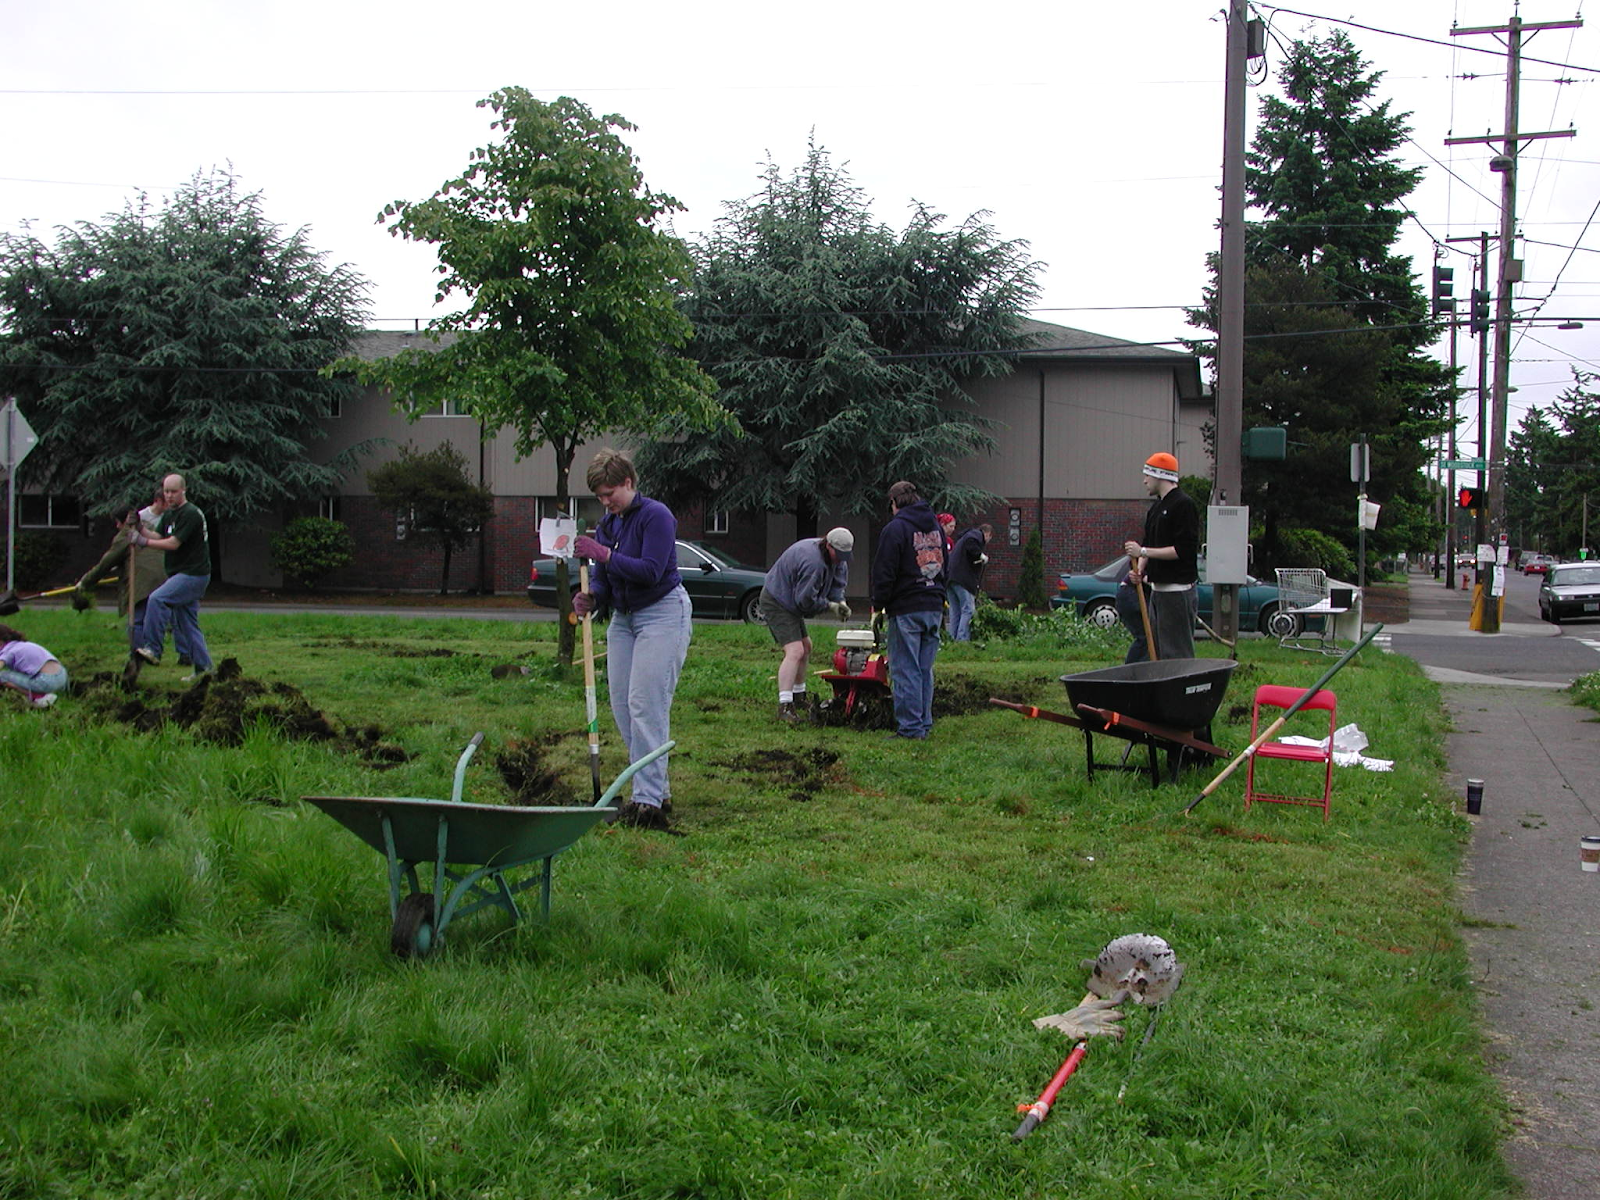 People are shown with shovels, wheelbarrows, and yard equipment in an open field of grass with a linden tree. In the background SE Woodstock Blvd can be seen.